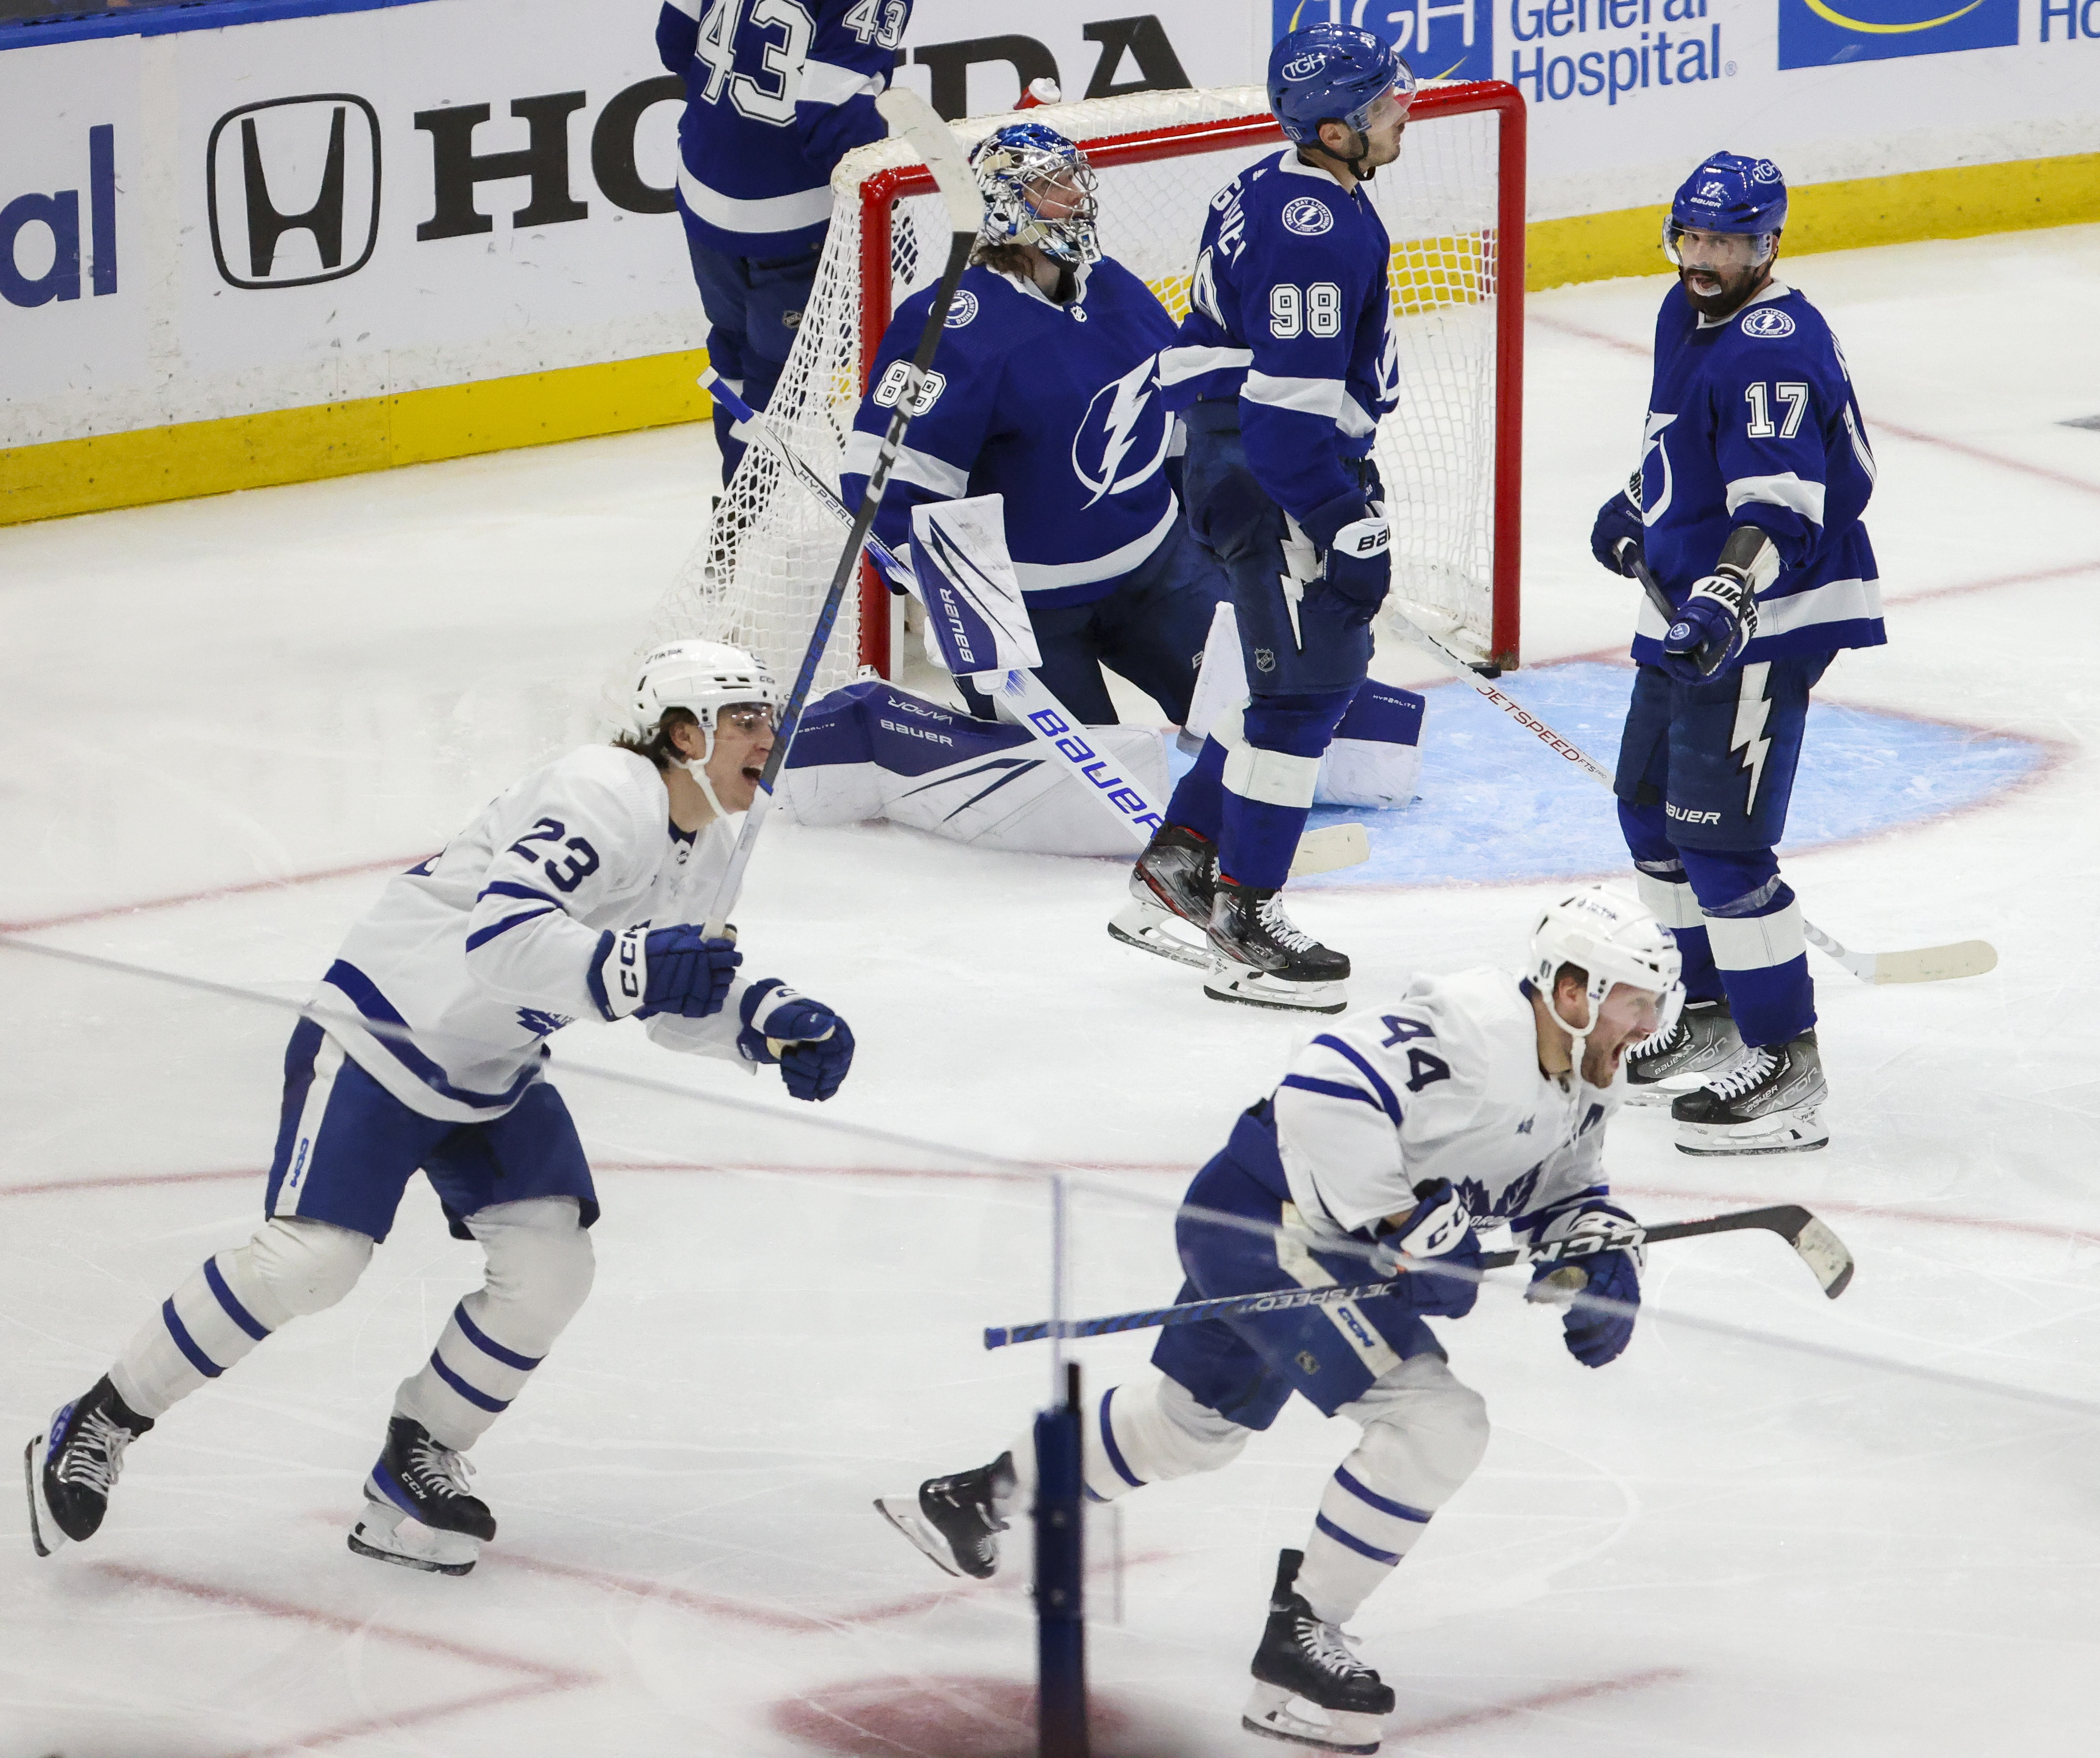 NHL scores: Panthers survive Maple Leafs' rally to win in OT